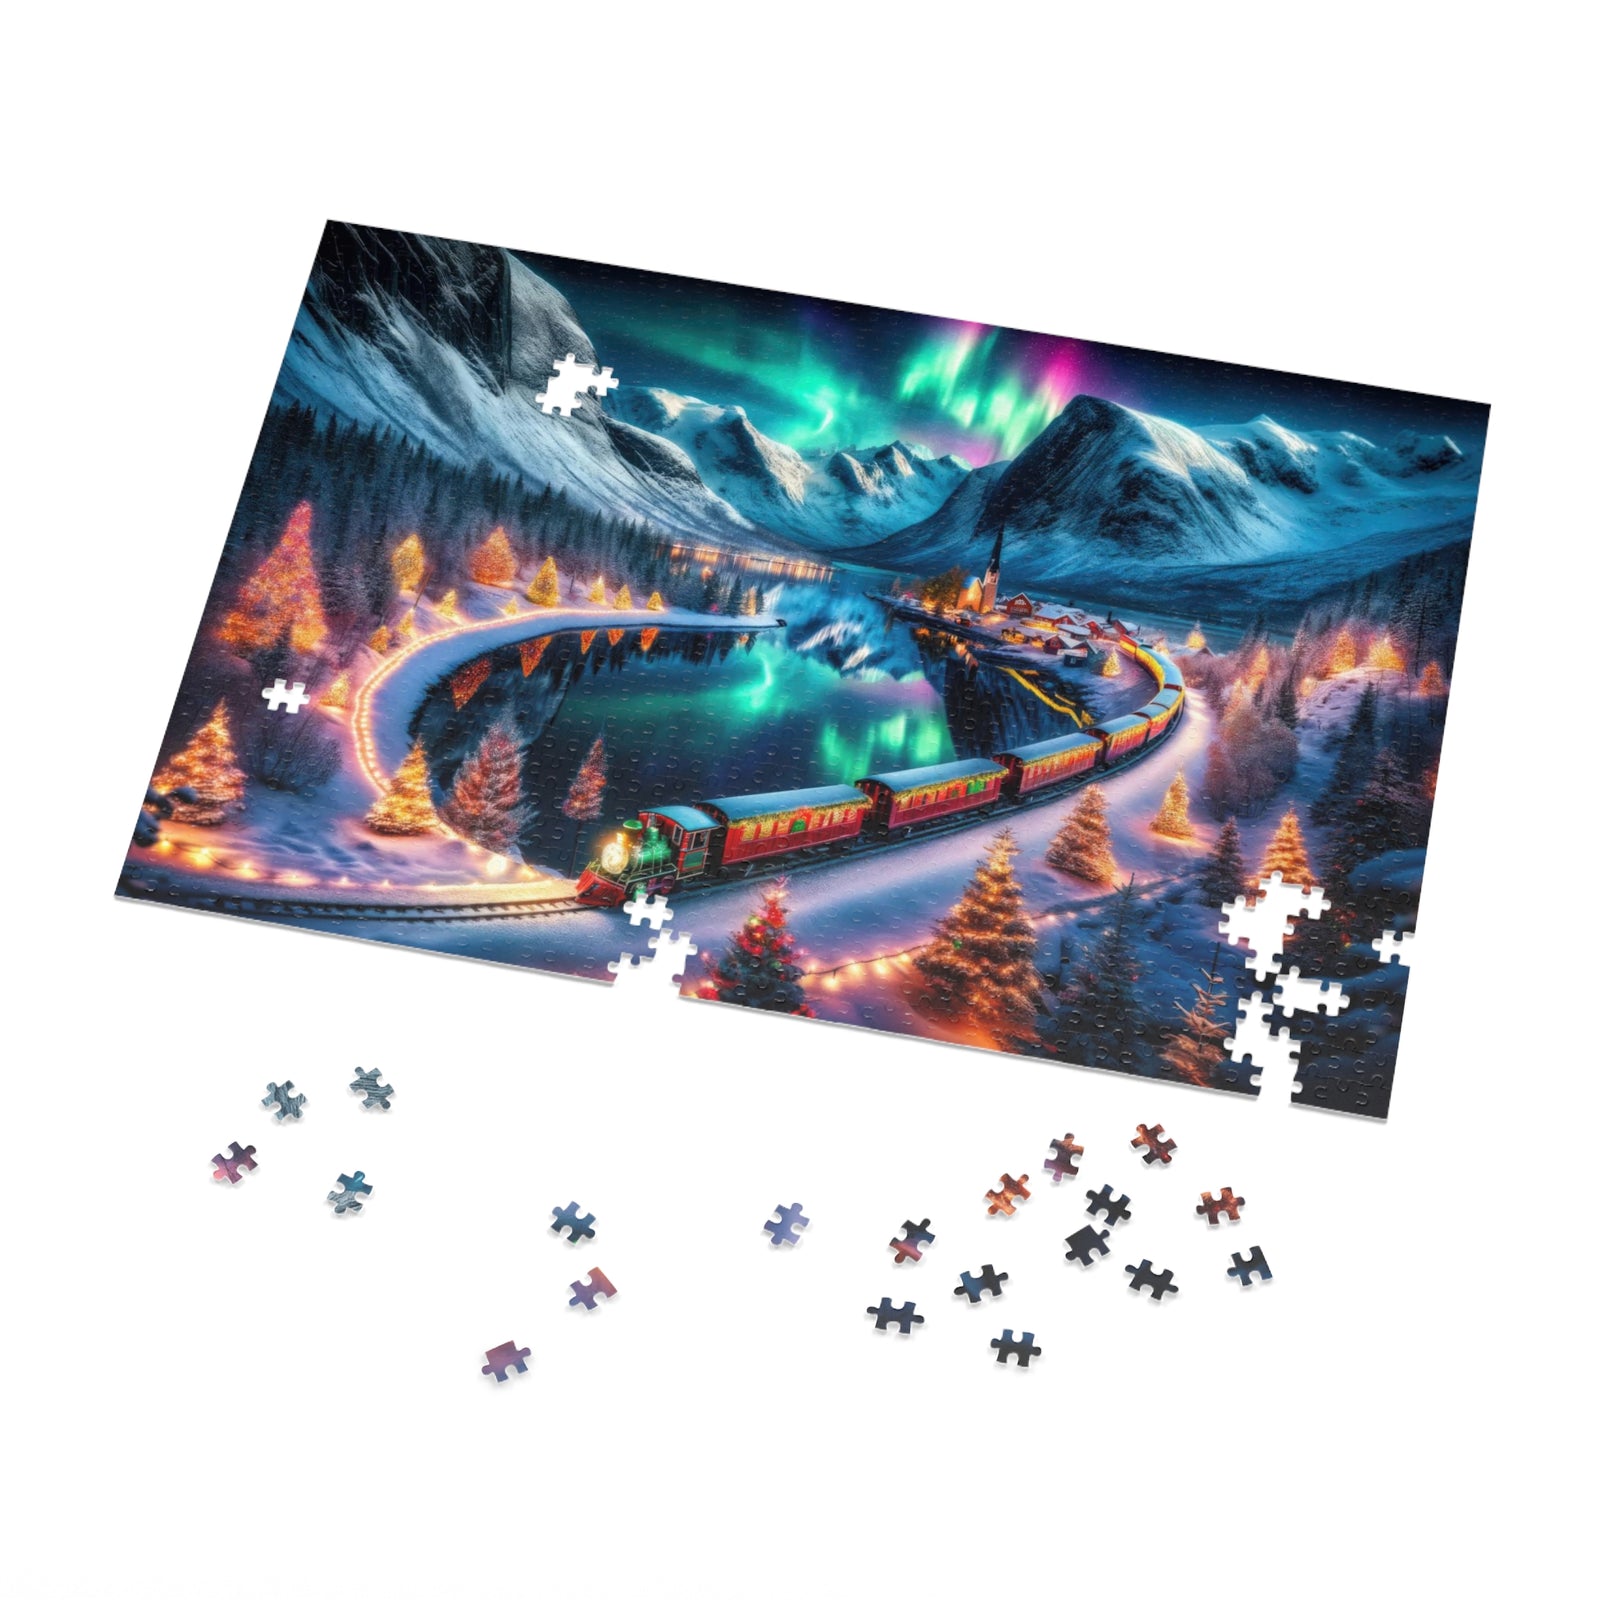 A Winter's Eve Journey Jigsaw Puzzle